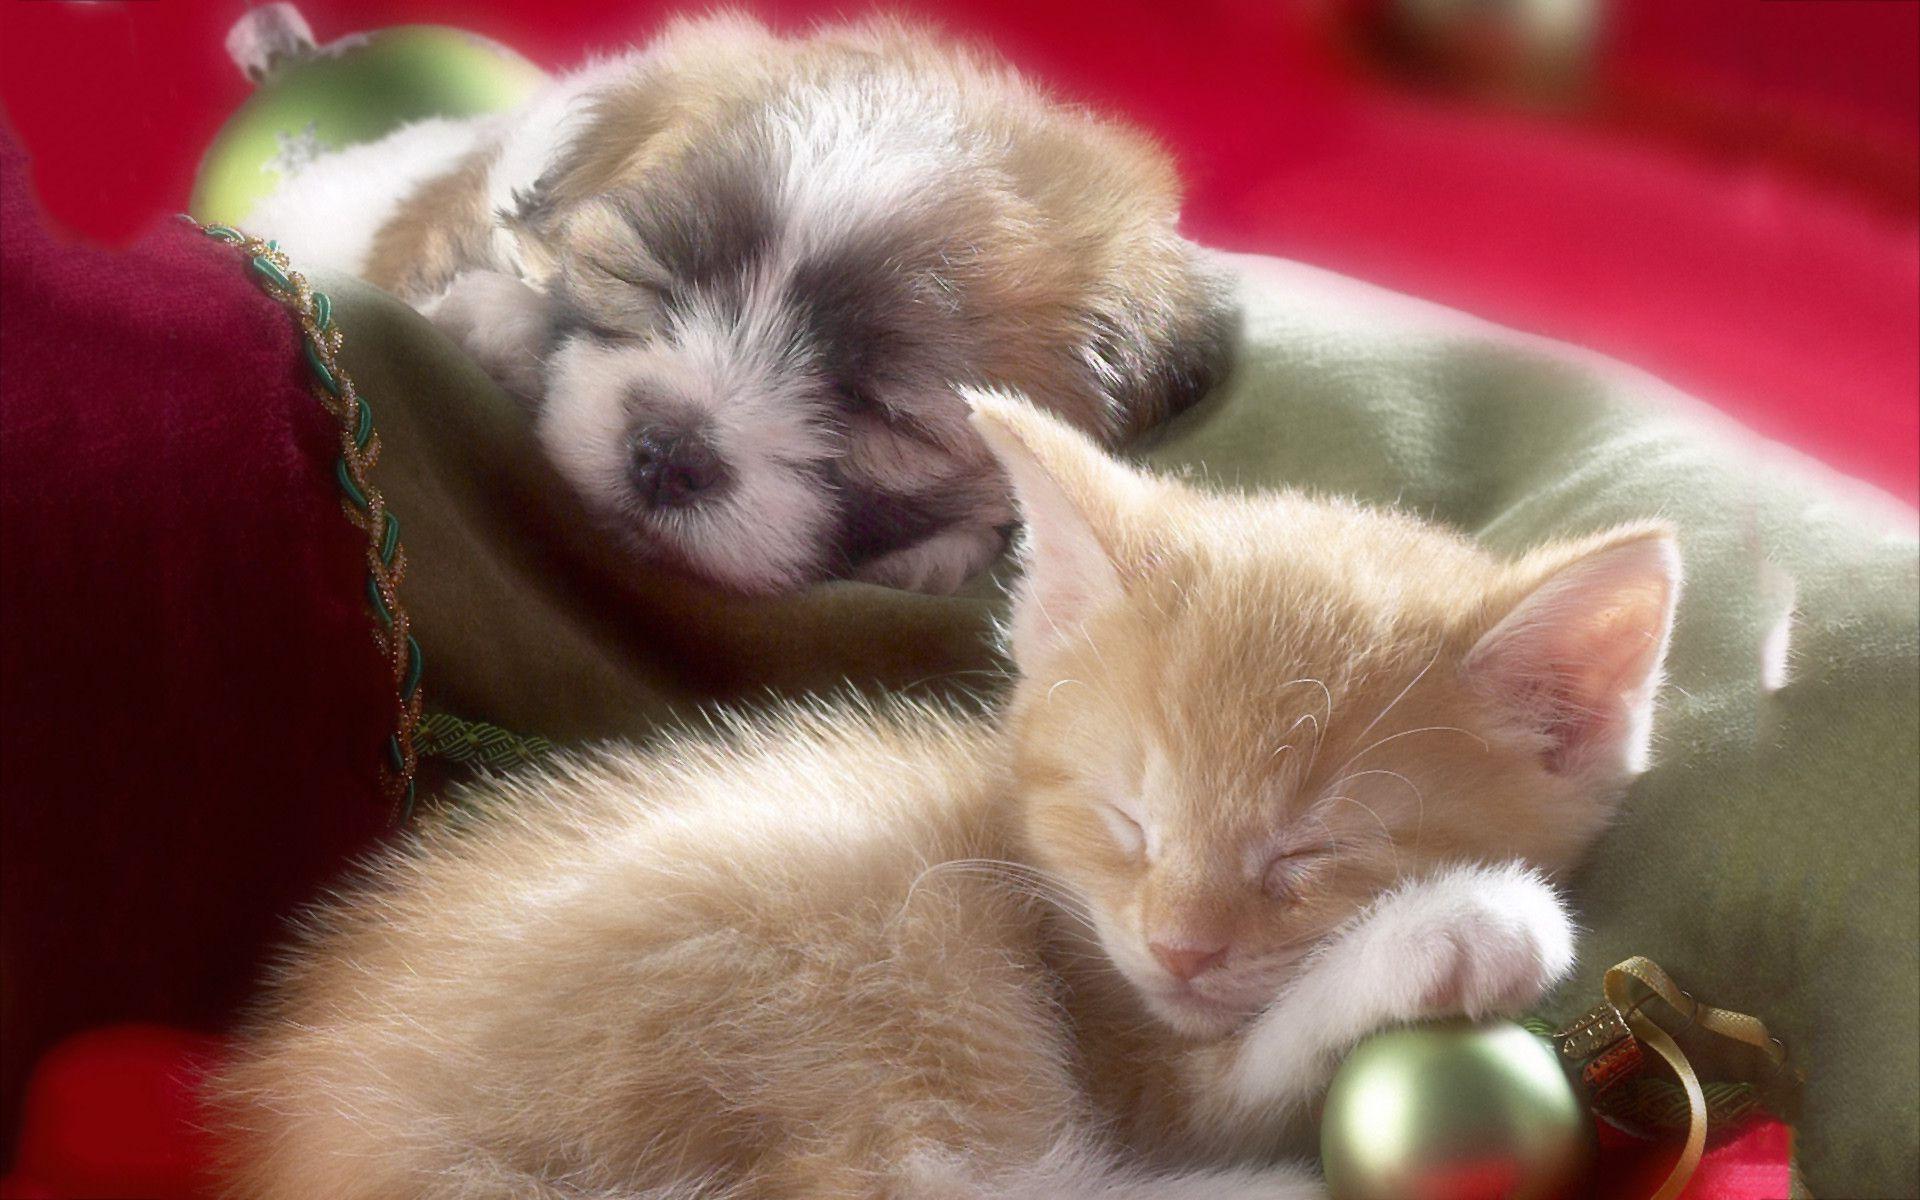 Puppies and Kittens Wallpaper background picture